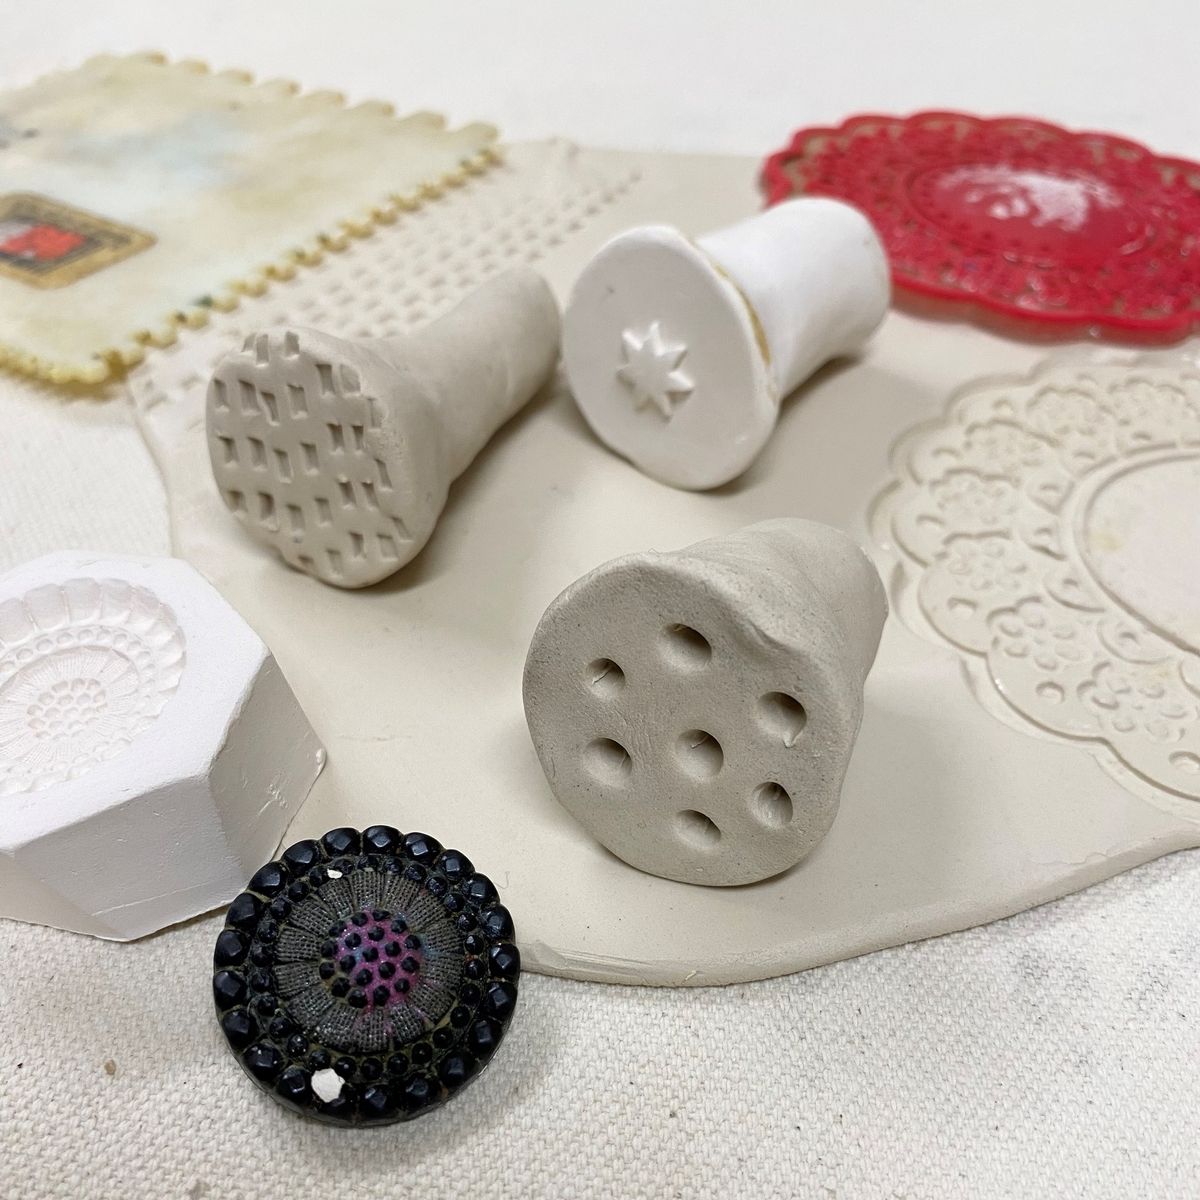 Ceramic Stamp Making with Found Objects: A Demonstration